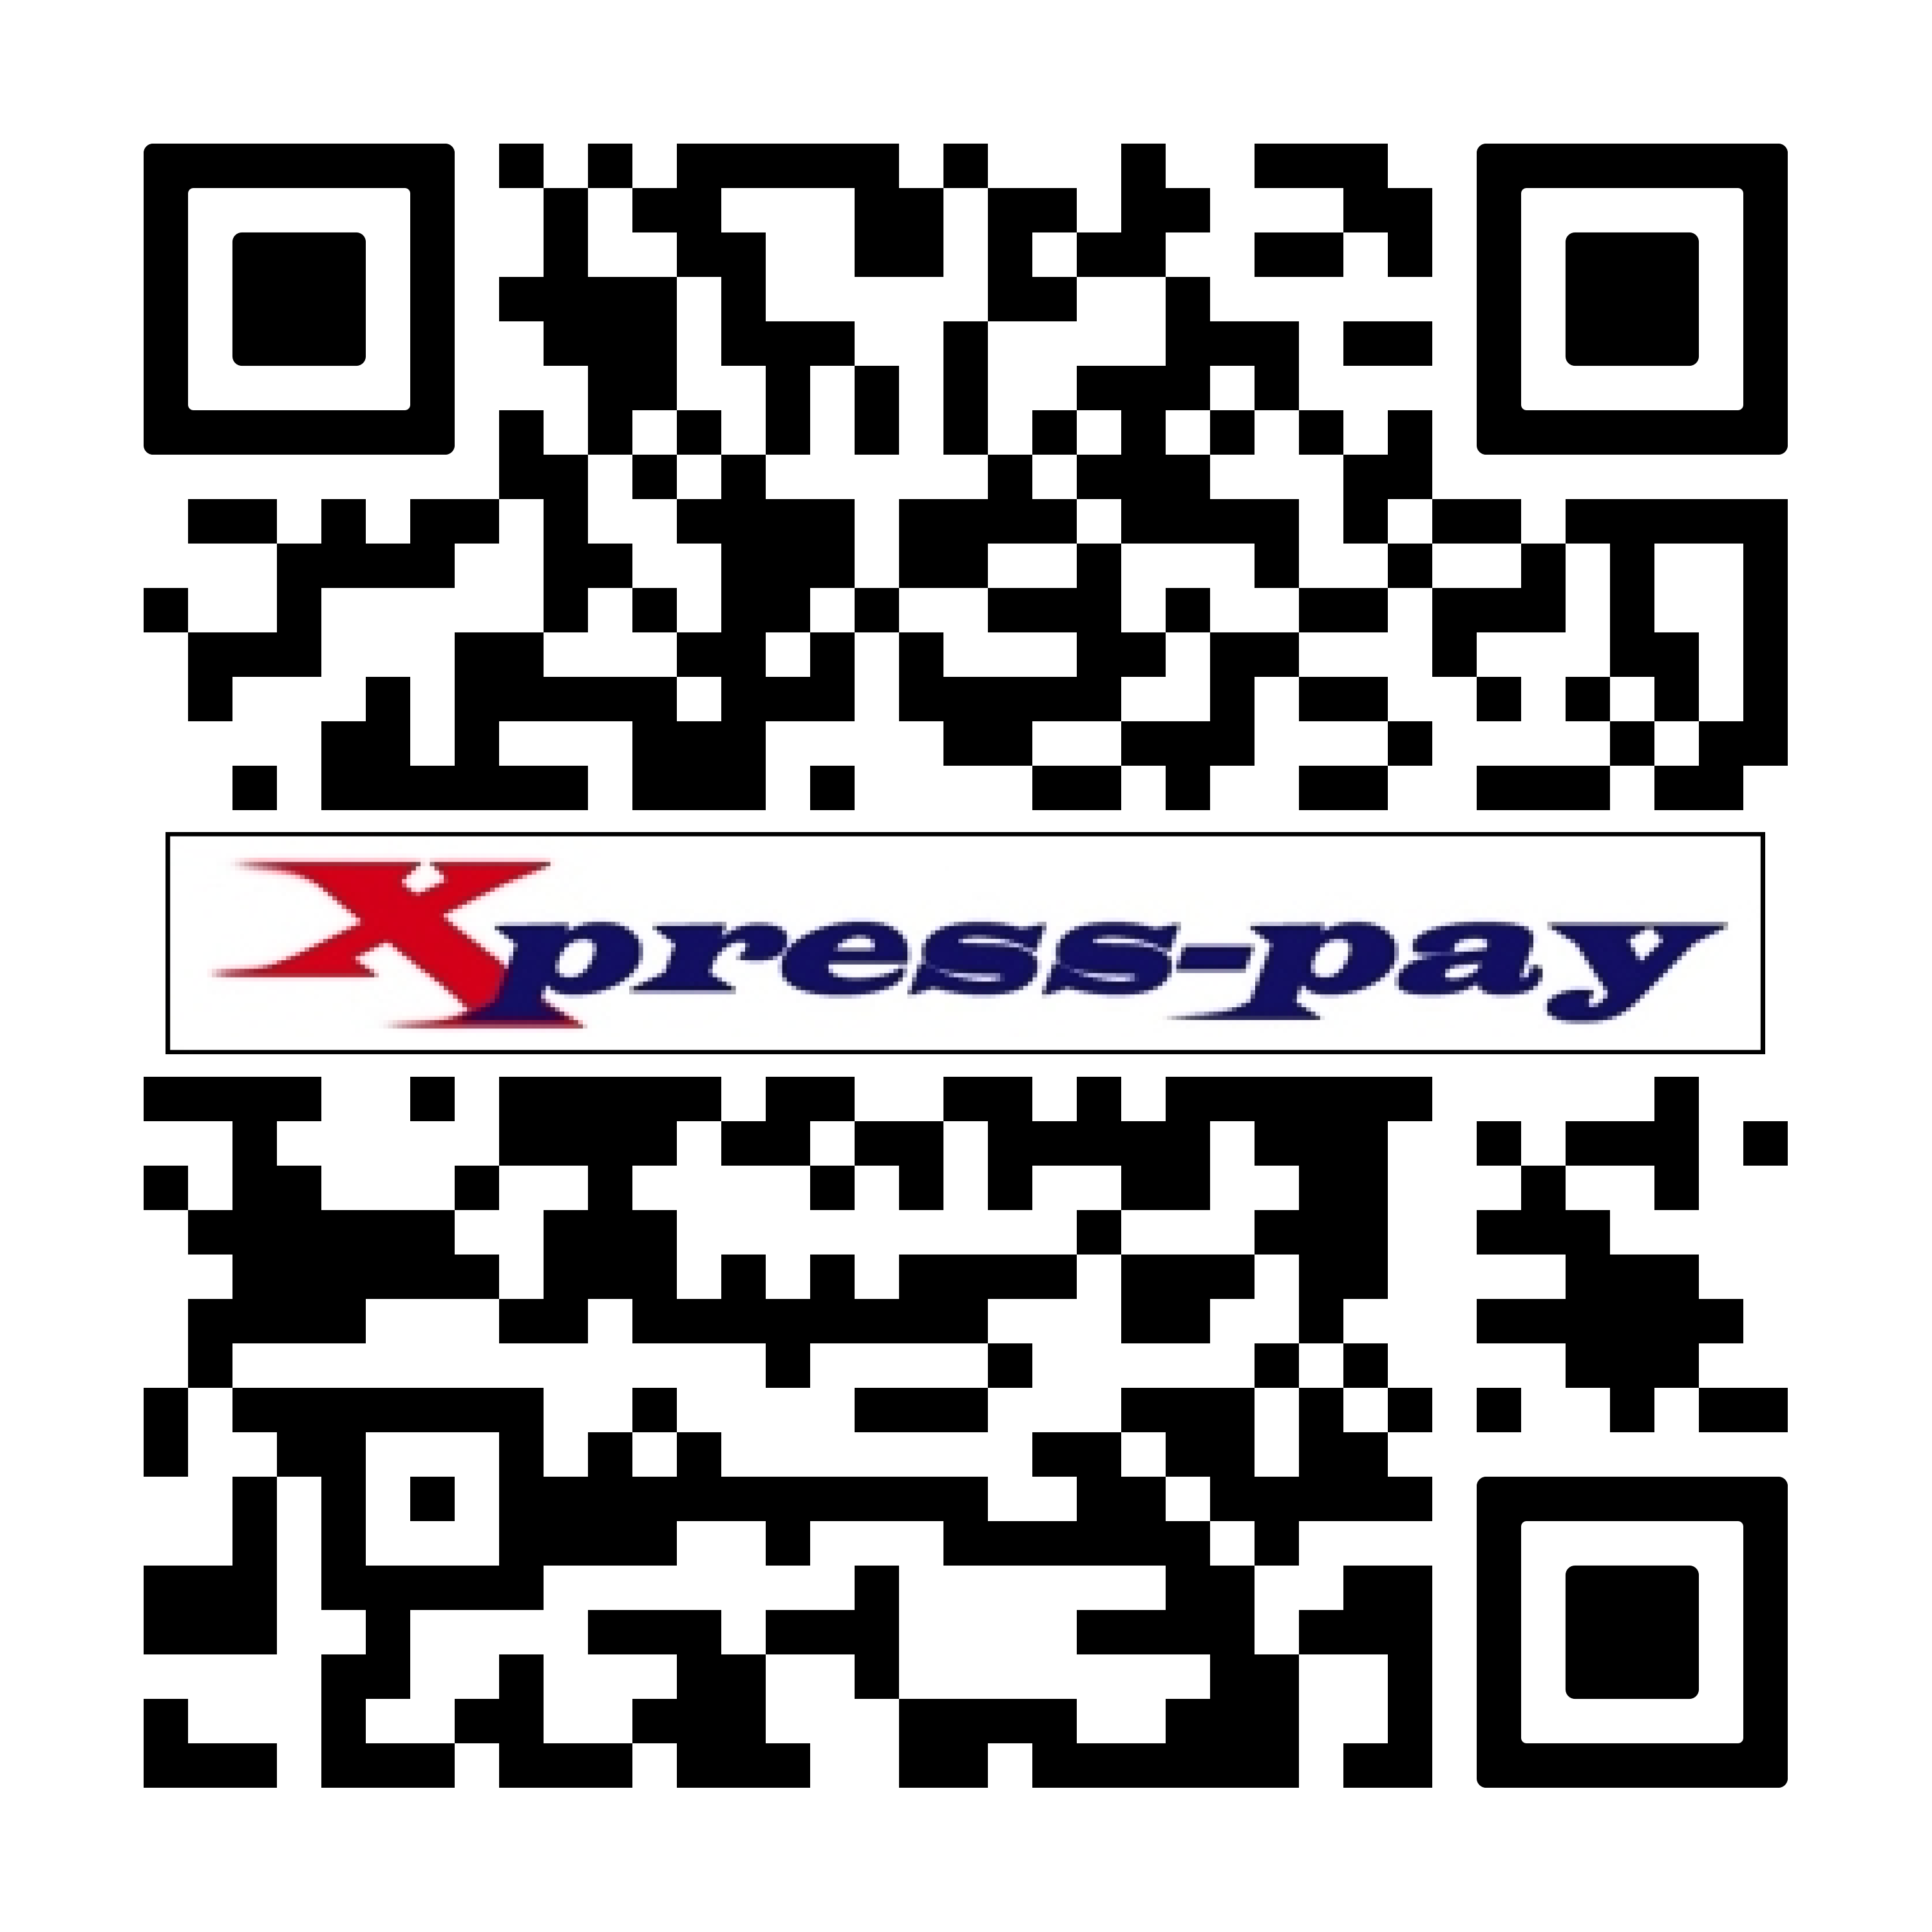 Xpress-pay Restaurant Payment Demo Using QR code